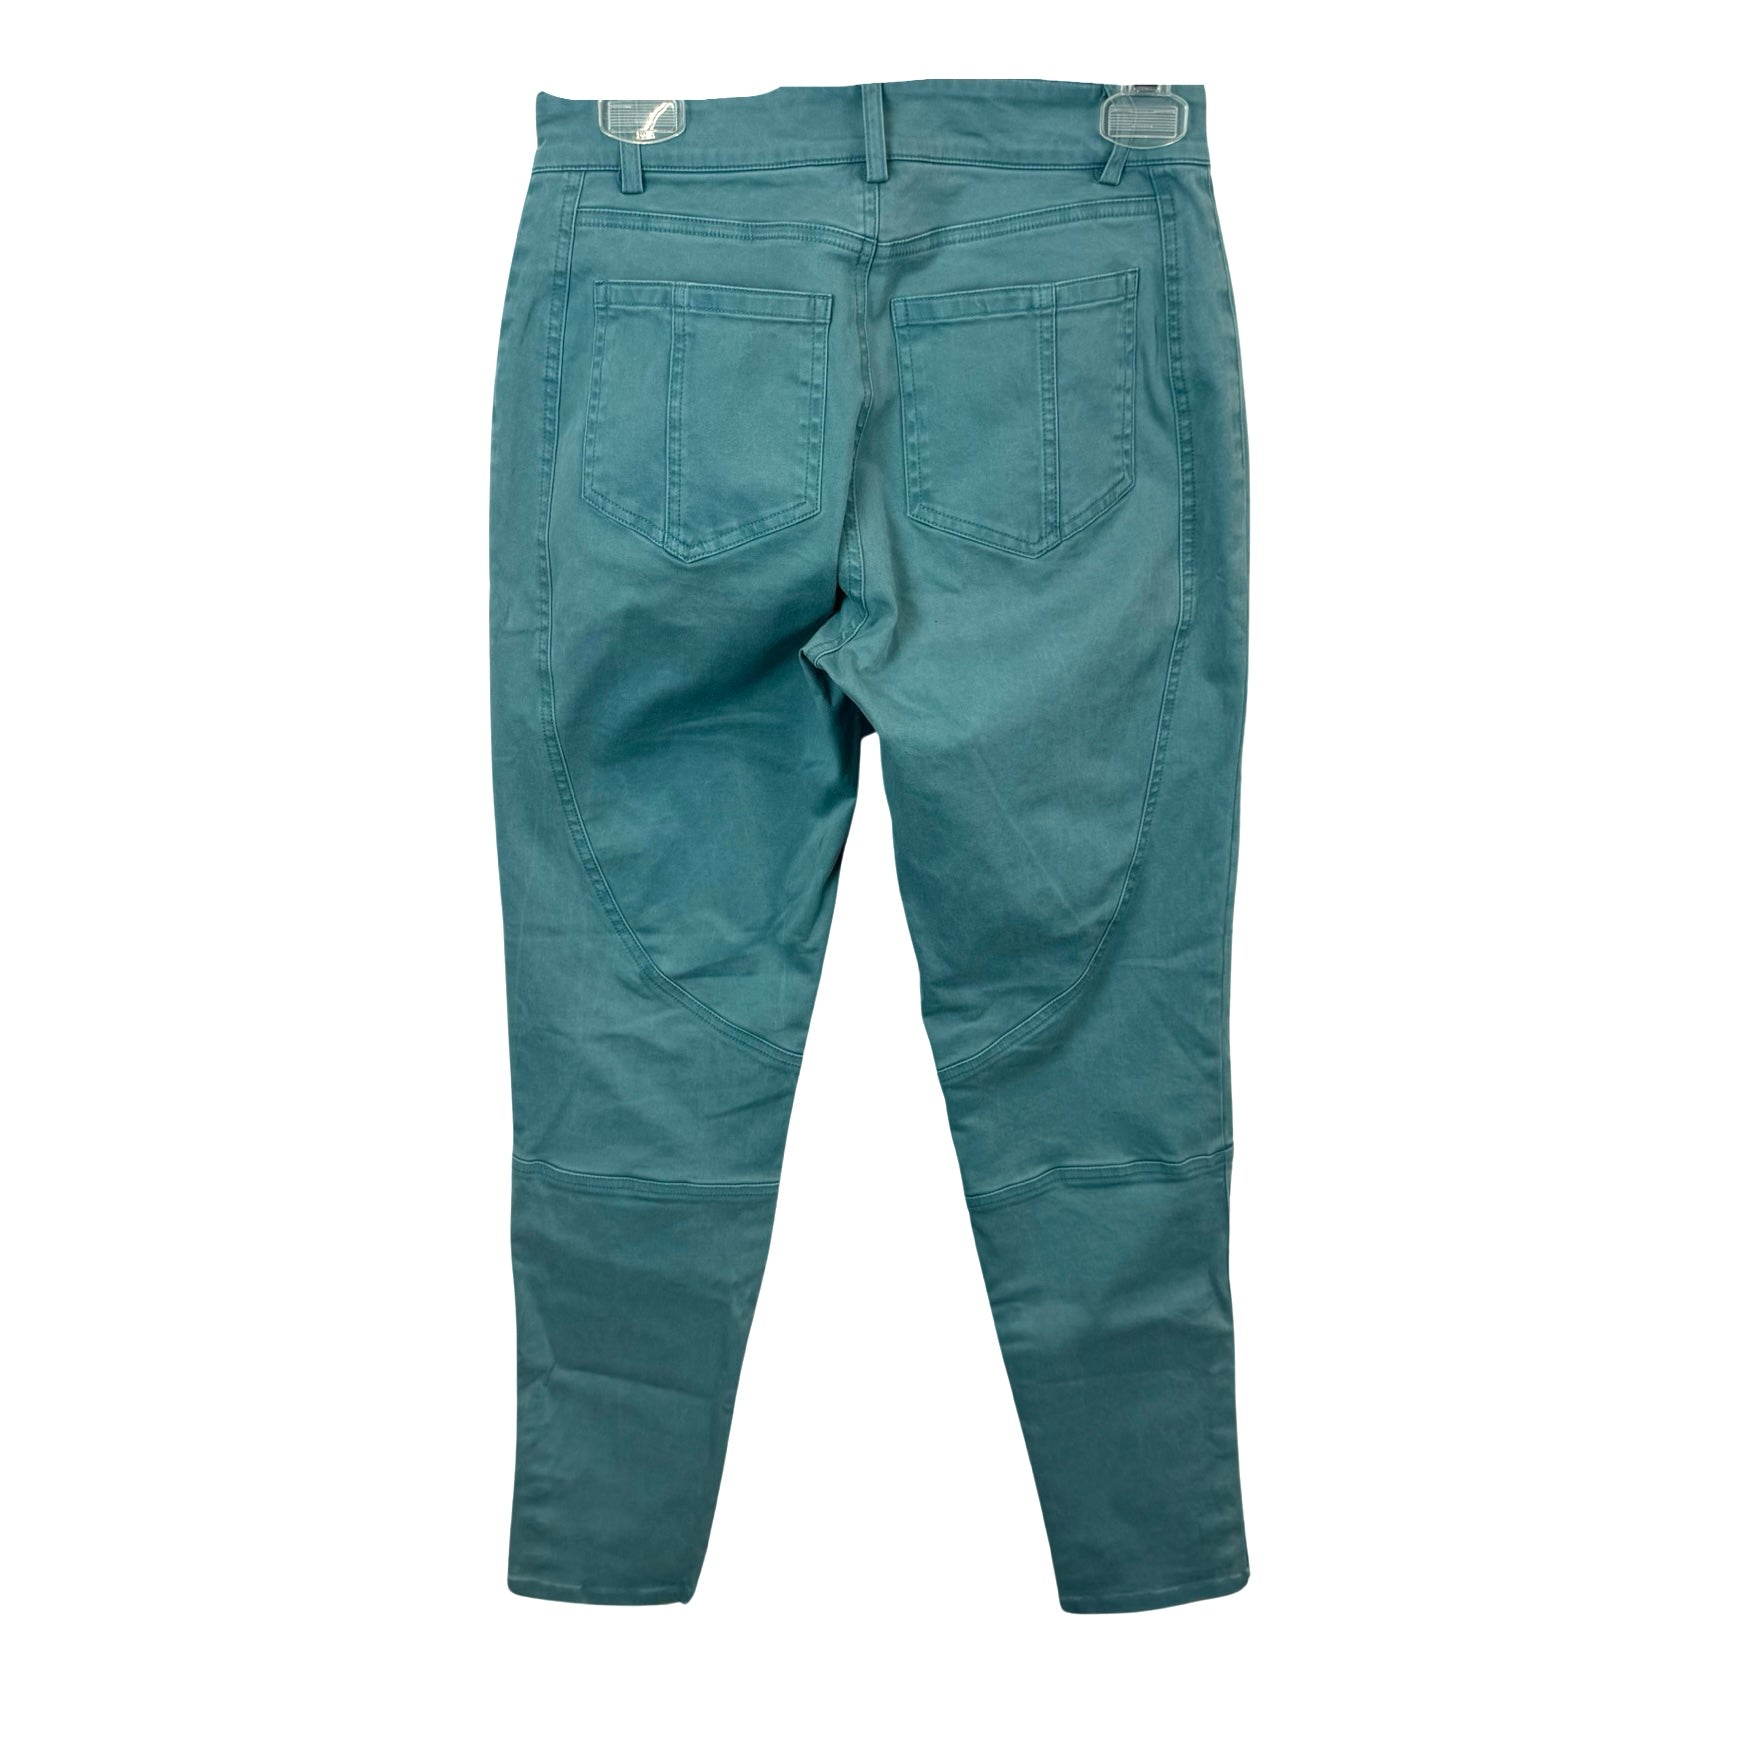 Peruvian Connection Blue Ryder Pant